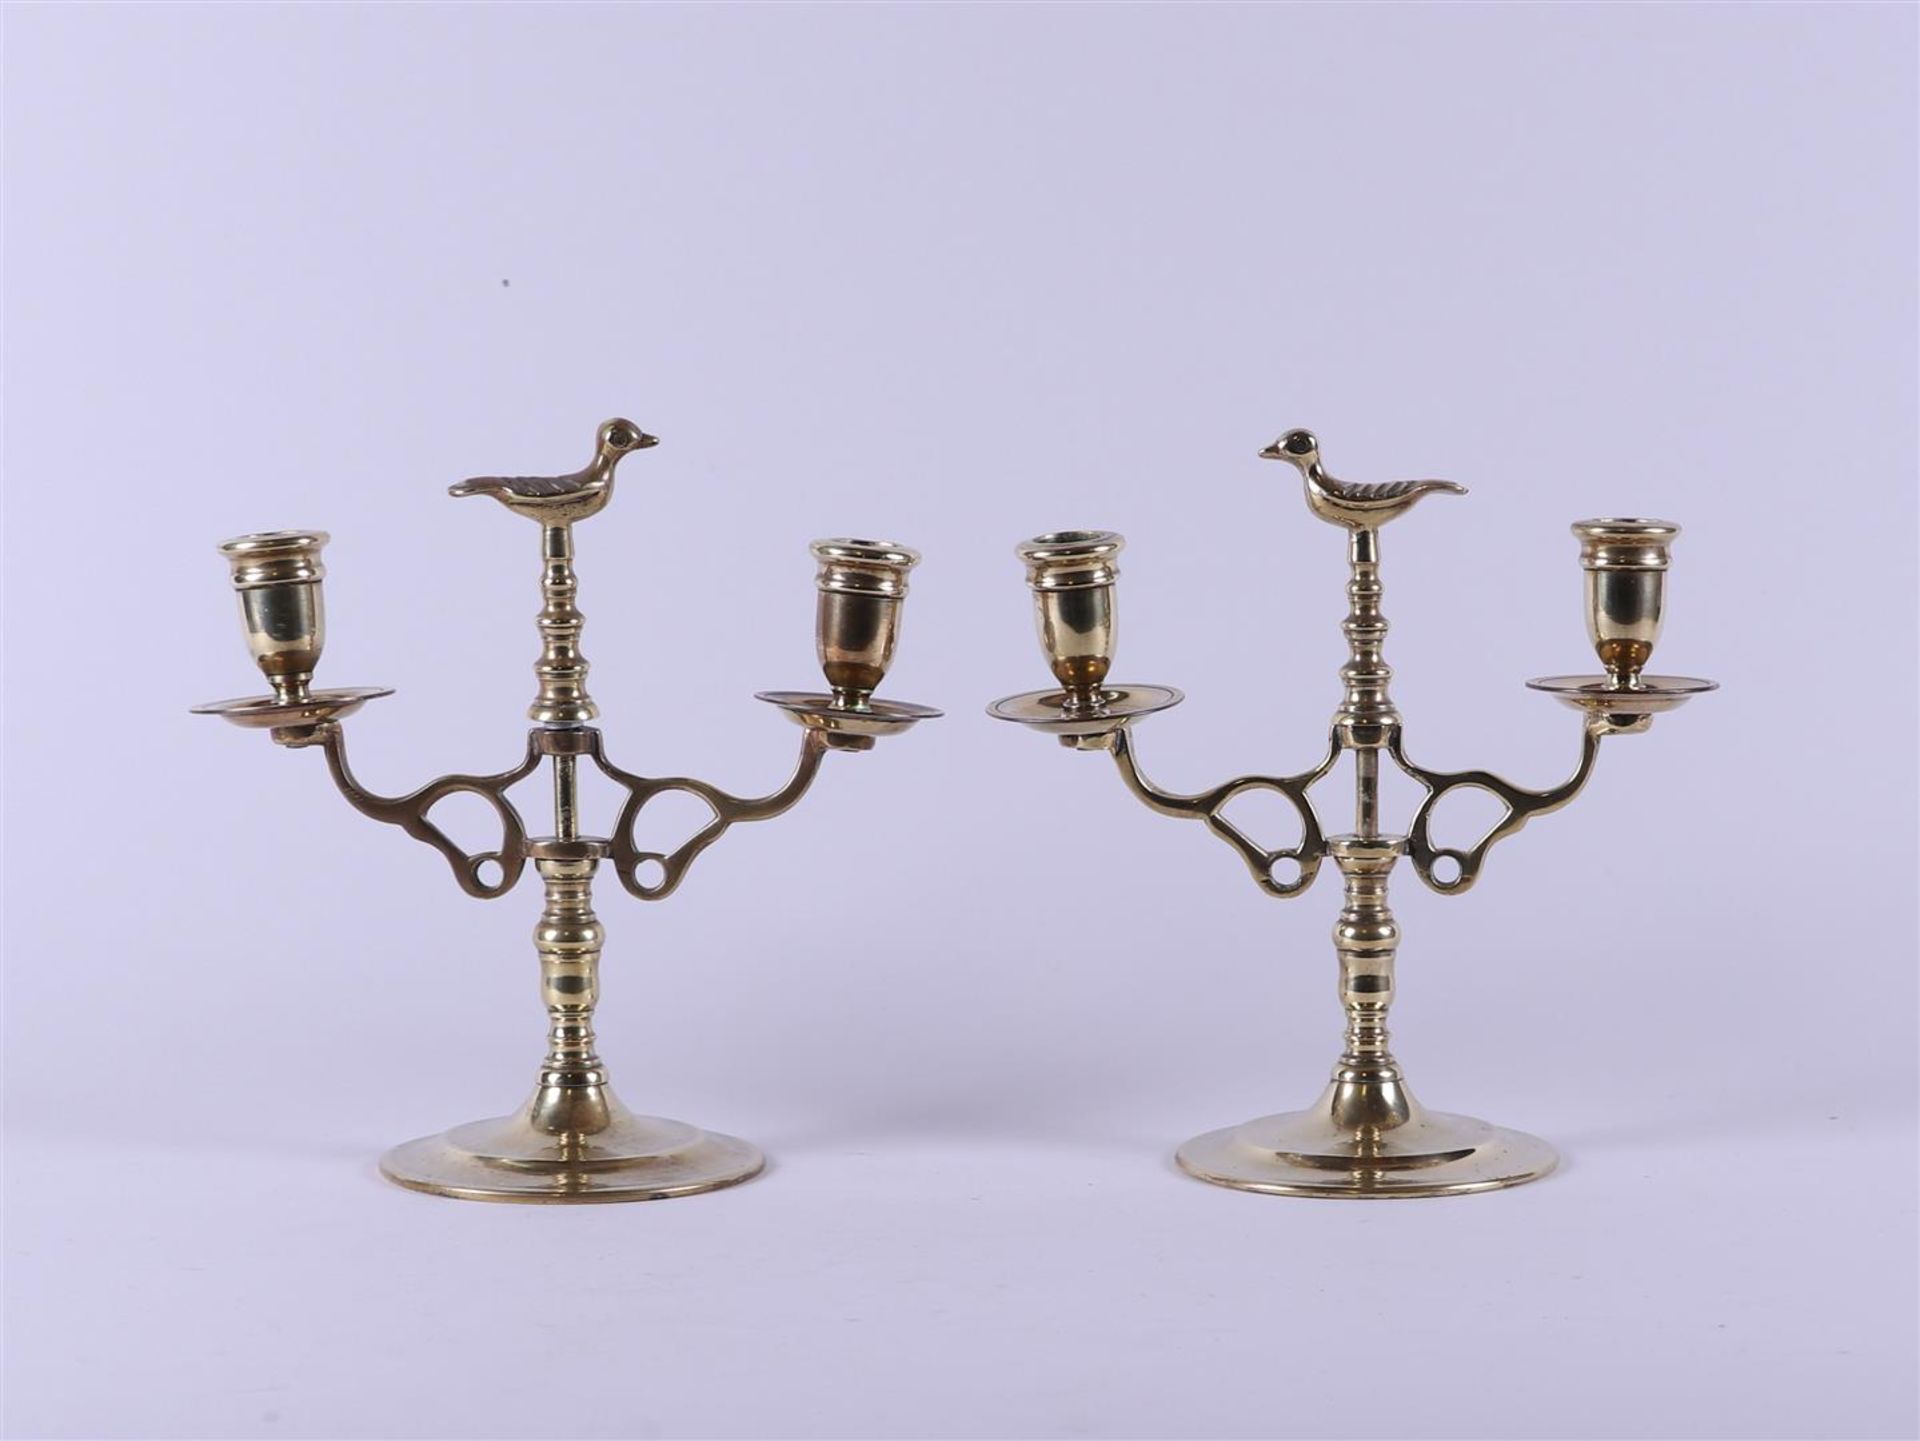 A set of brass two-light candlesticks with a bird in the centre. Holland, 19th century.